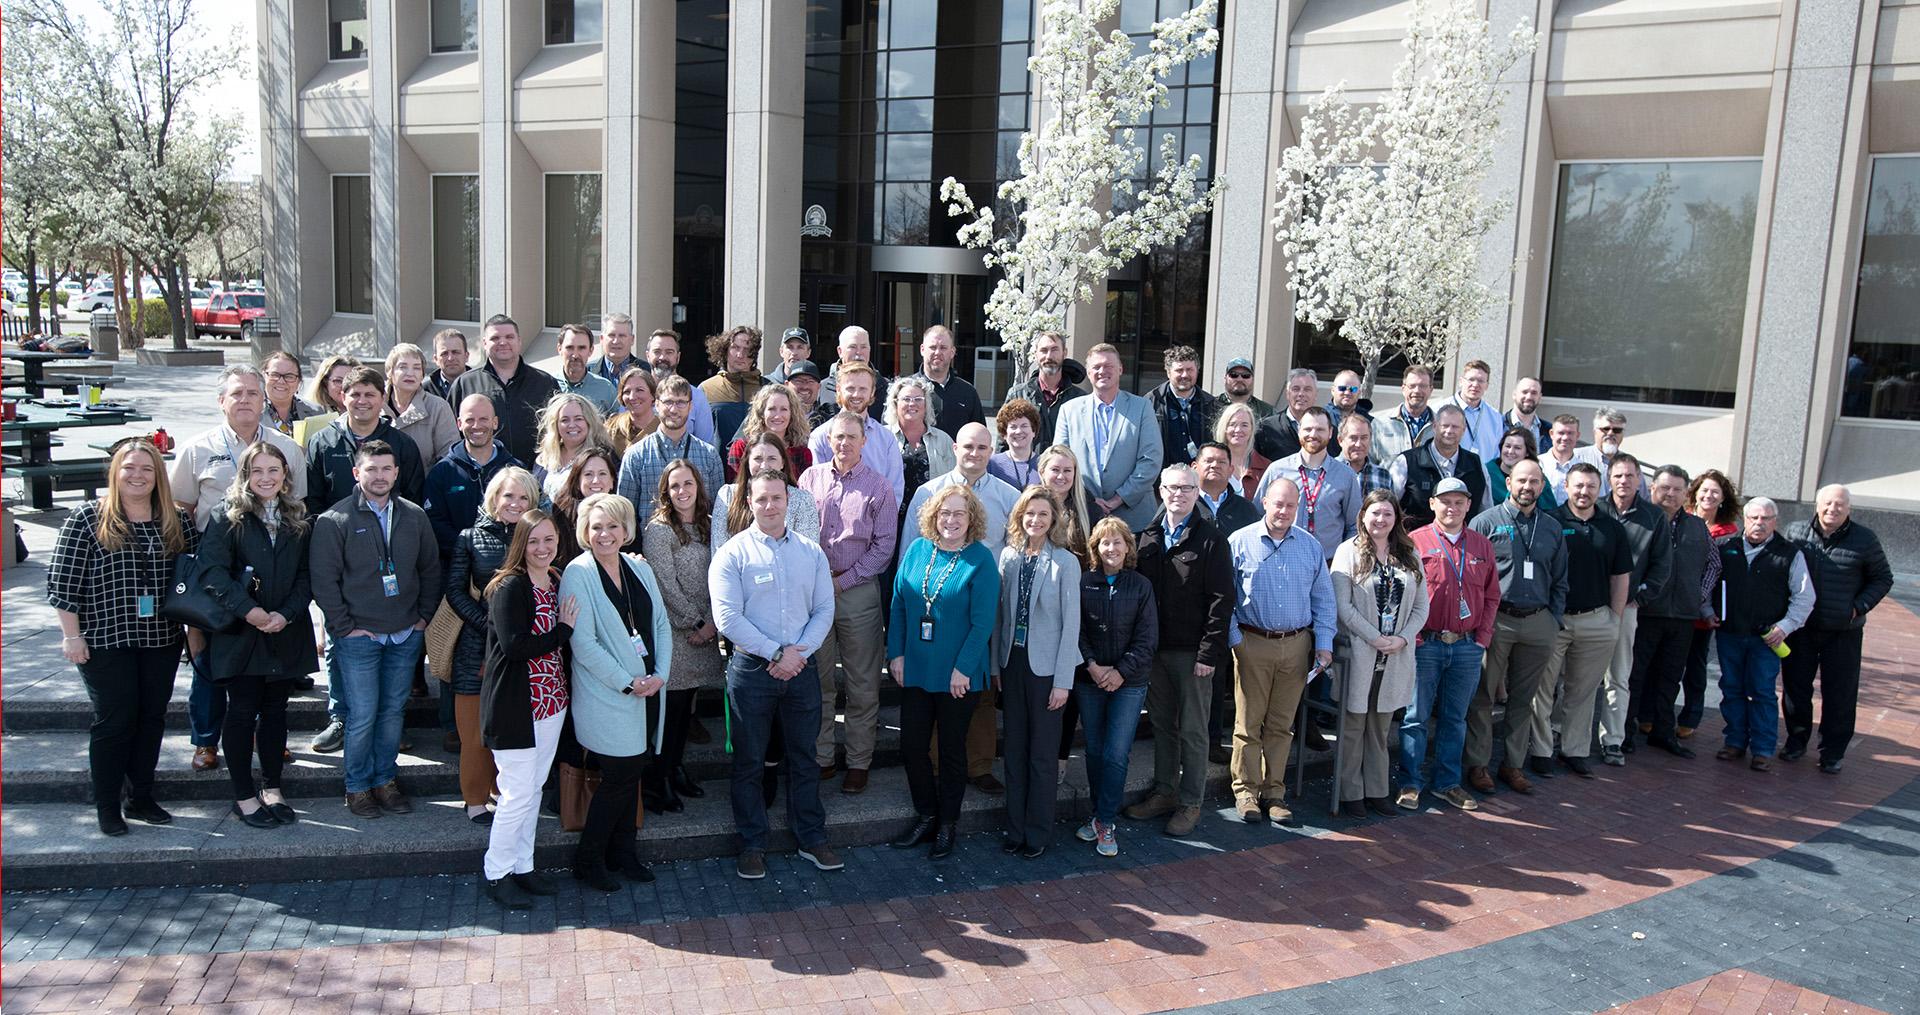 Idaho Power employees gathered together for a group photo